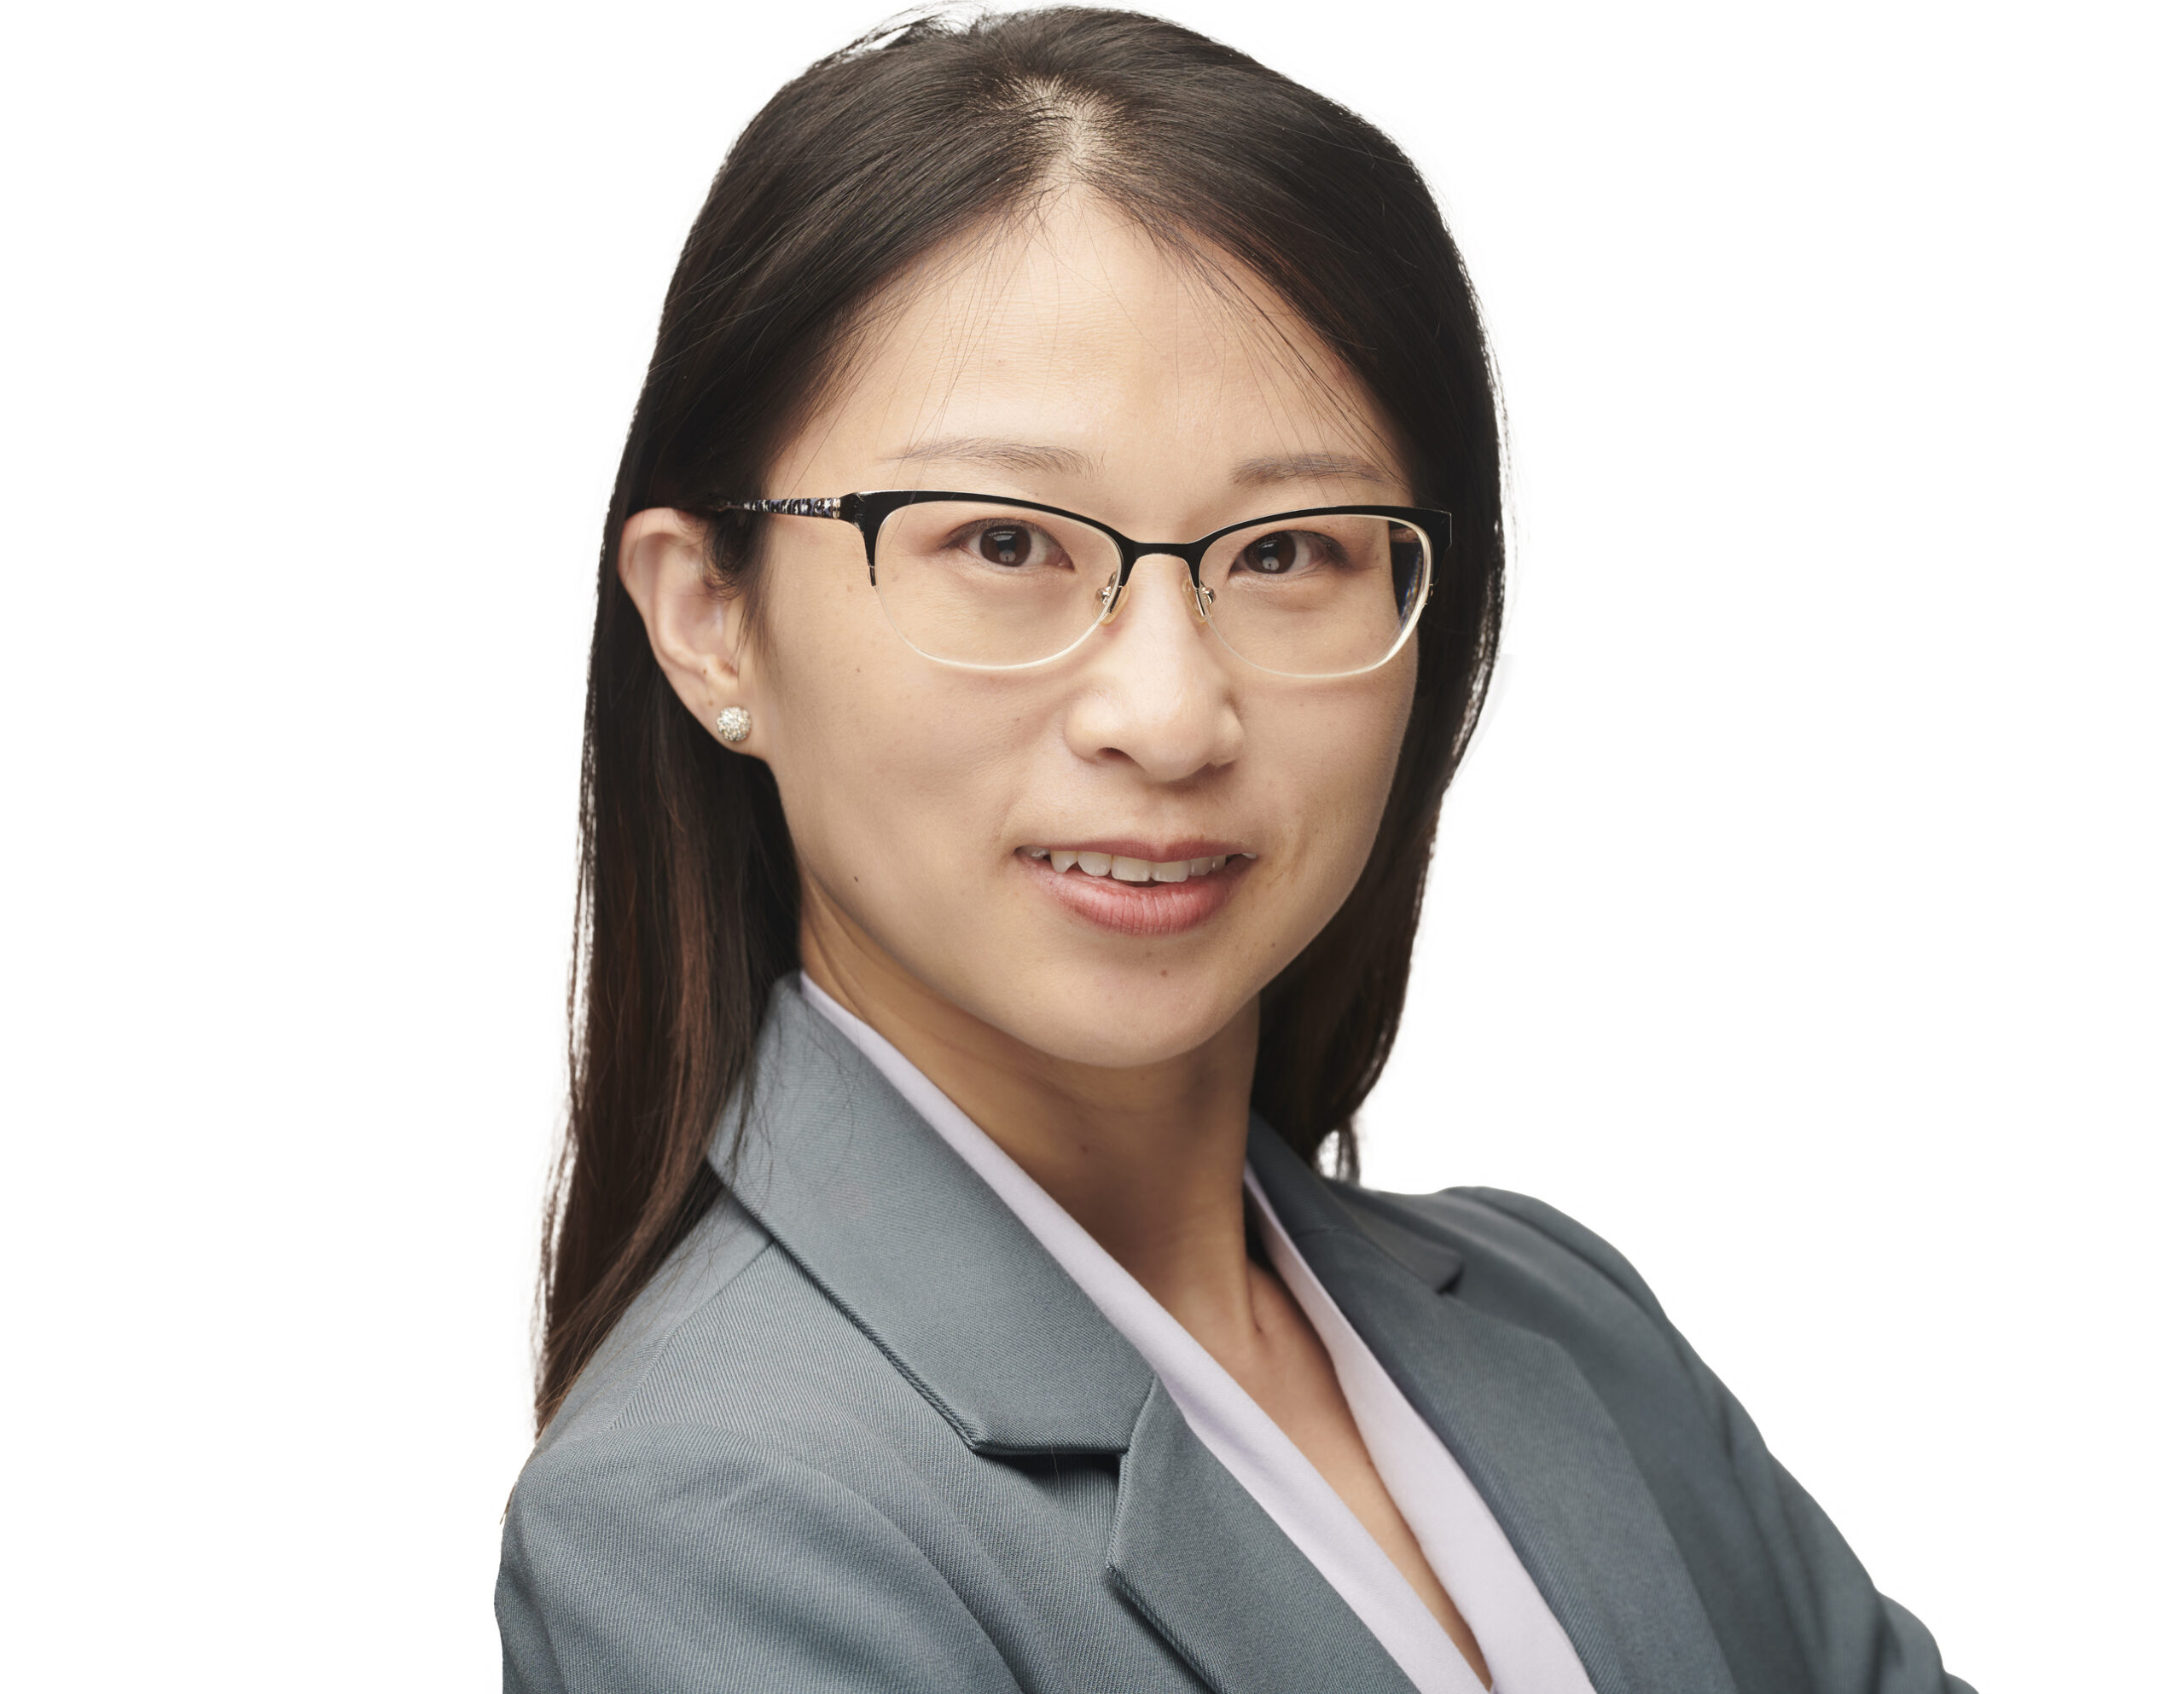 Qiao Duan PM, Trading and Quantitative Analysis at Tidal Financial Group